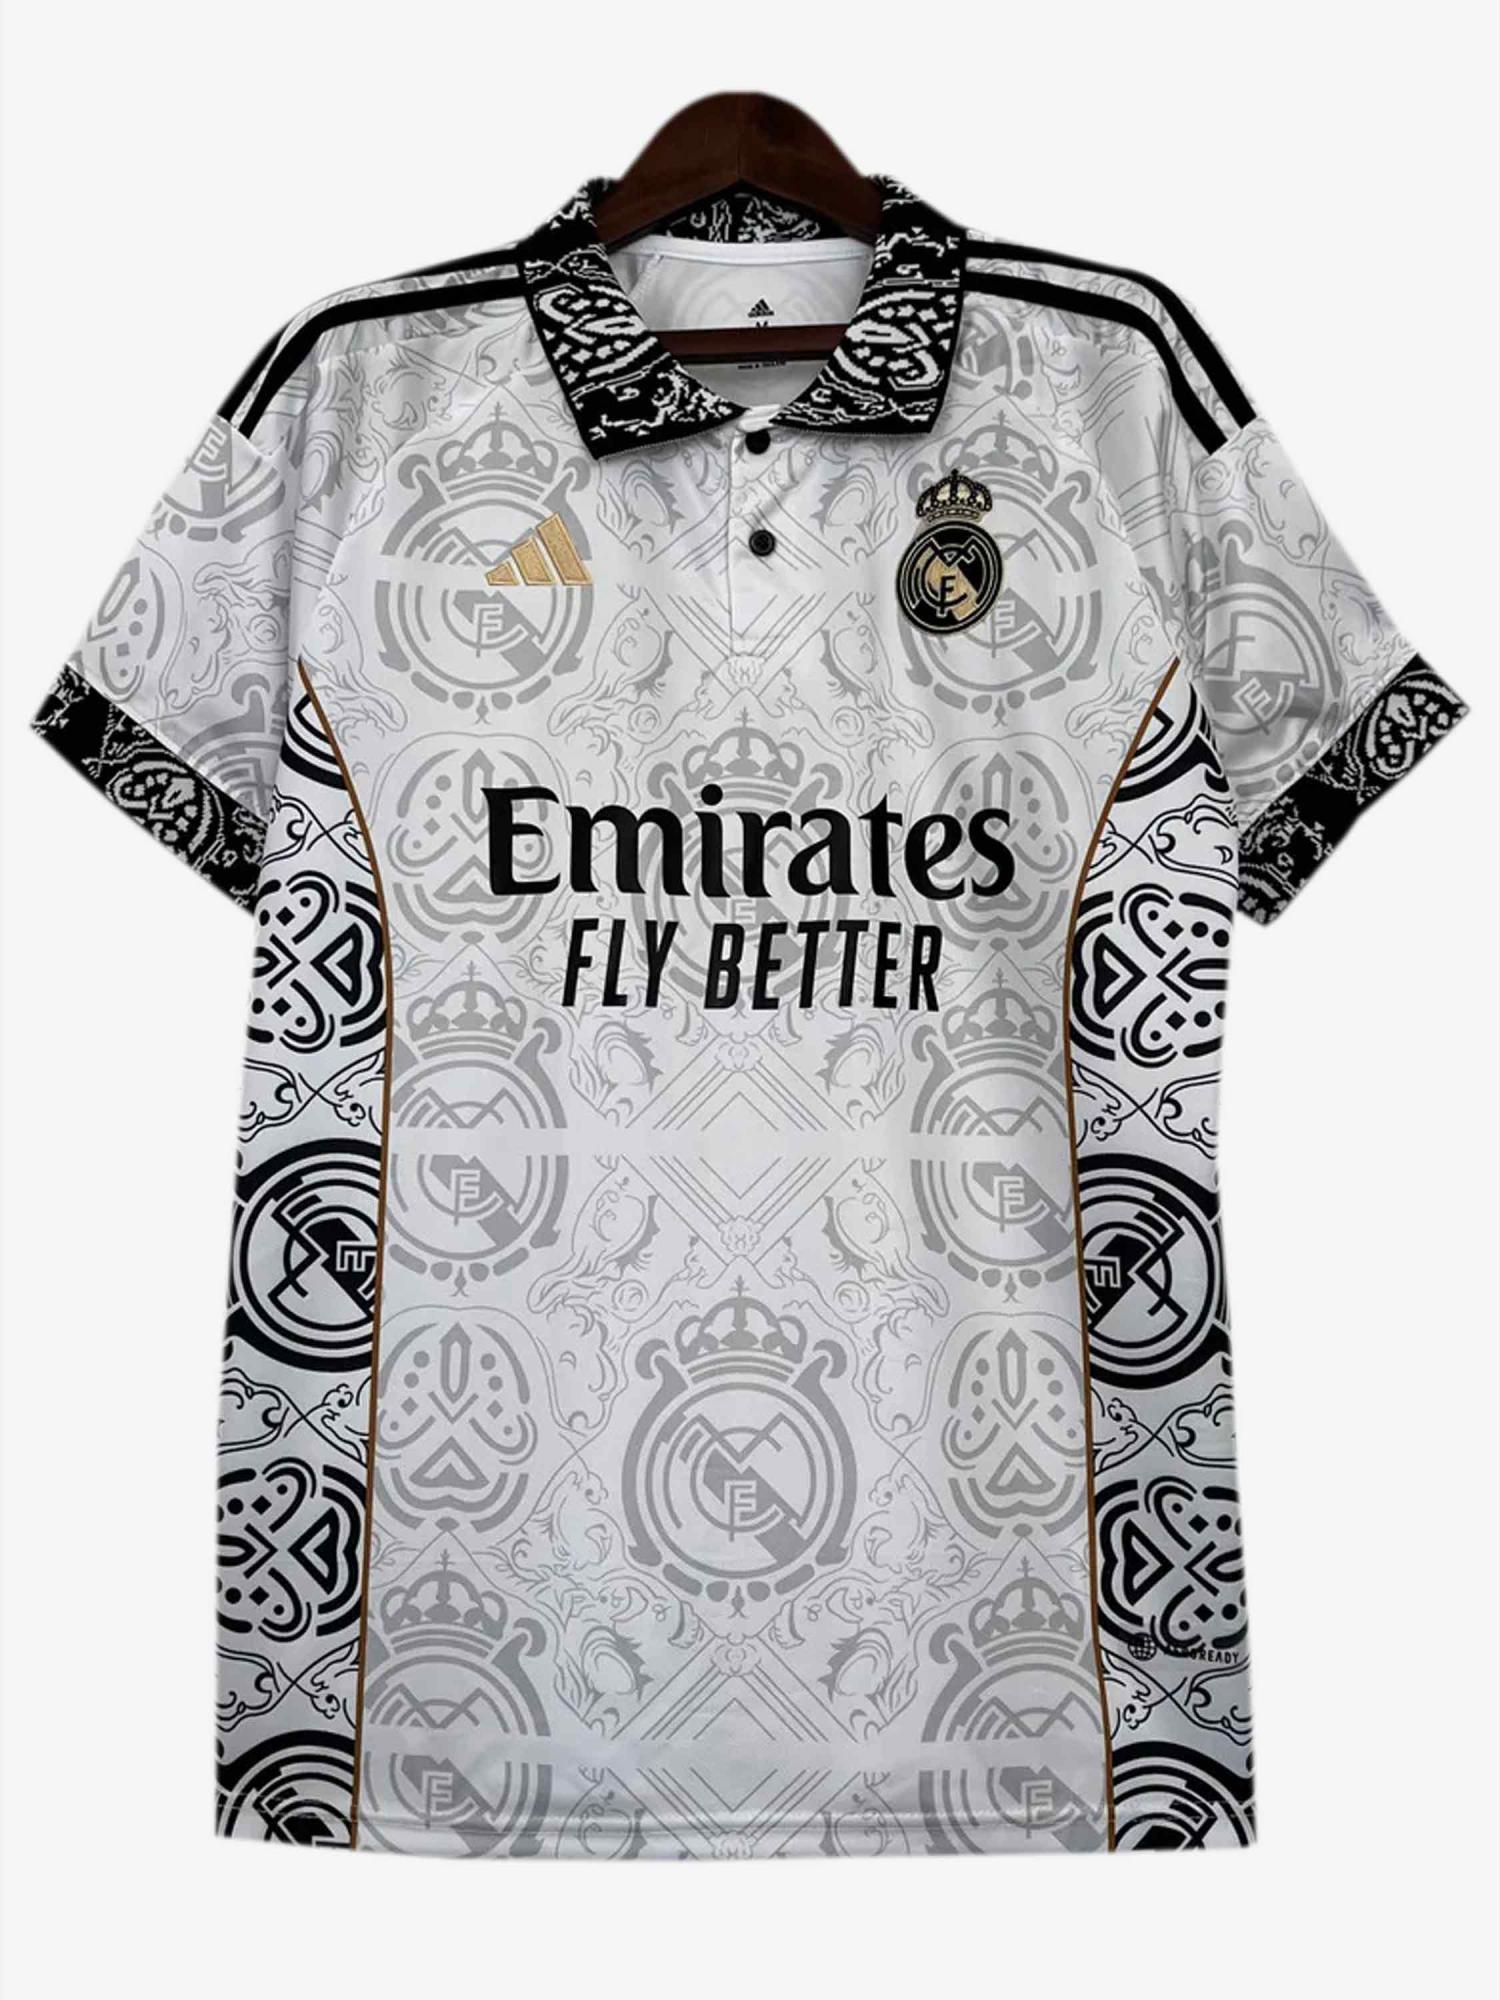 Real-Madrid-23-24-white-Classic-authentic-jersey-White